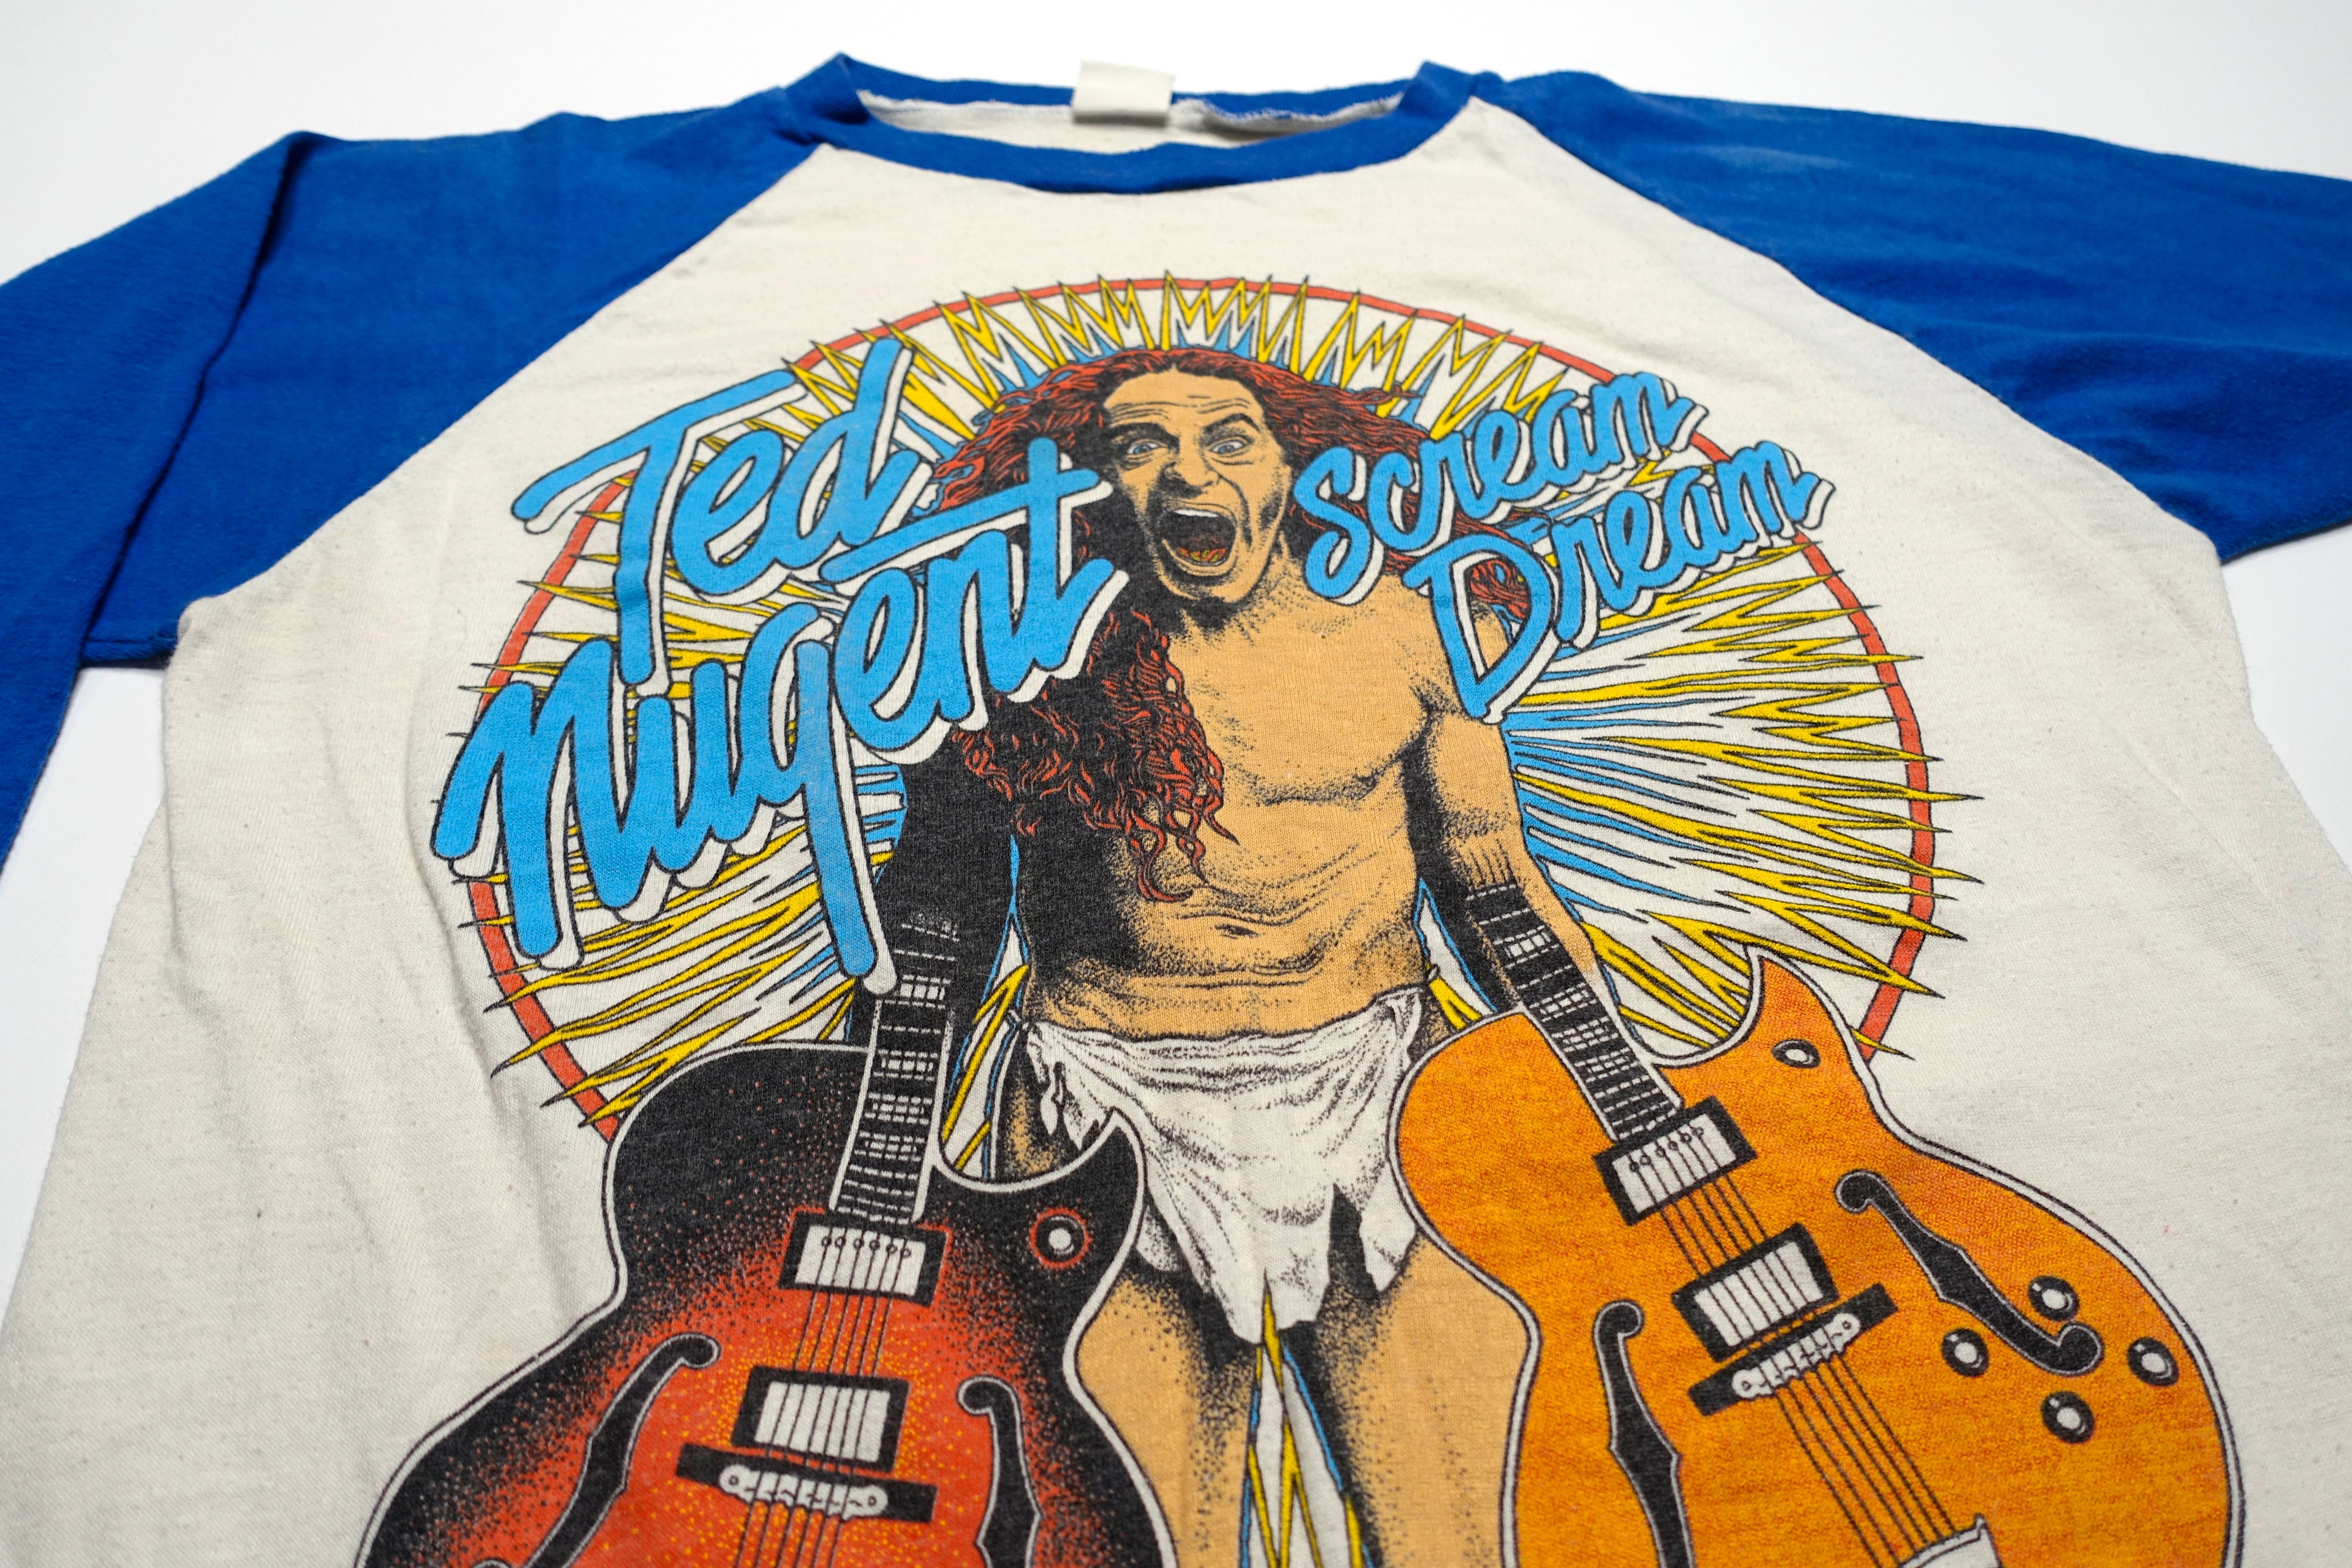 Ted Nugent ‎– Scream Dream 1980 Tour Jersey / Shirt Size Small